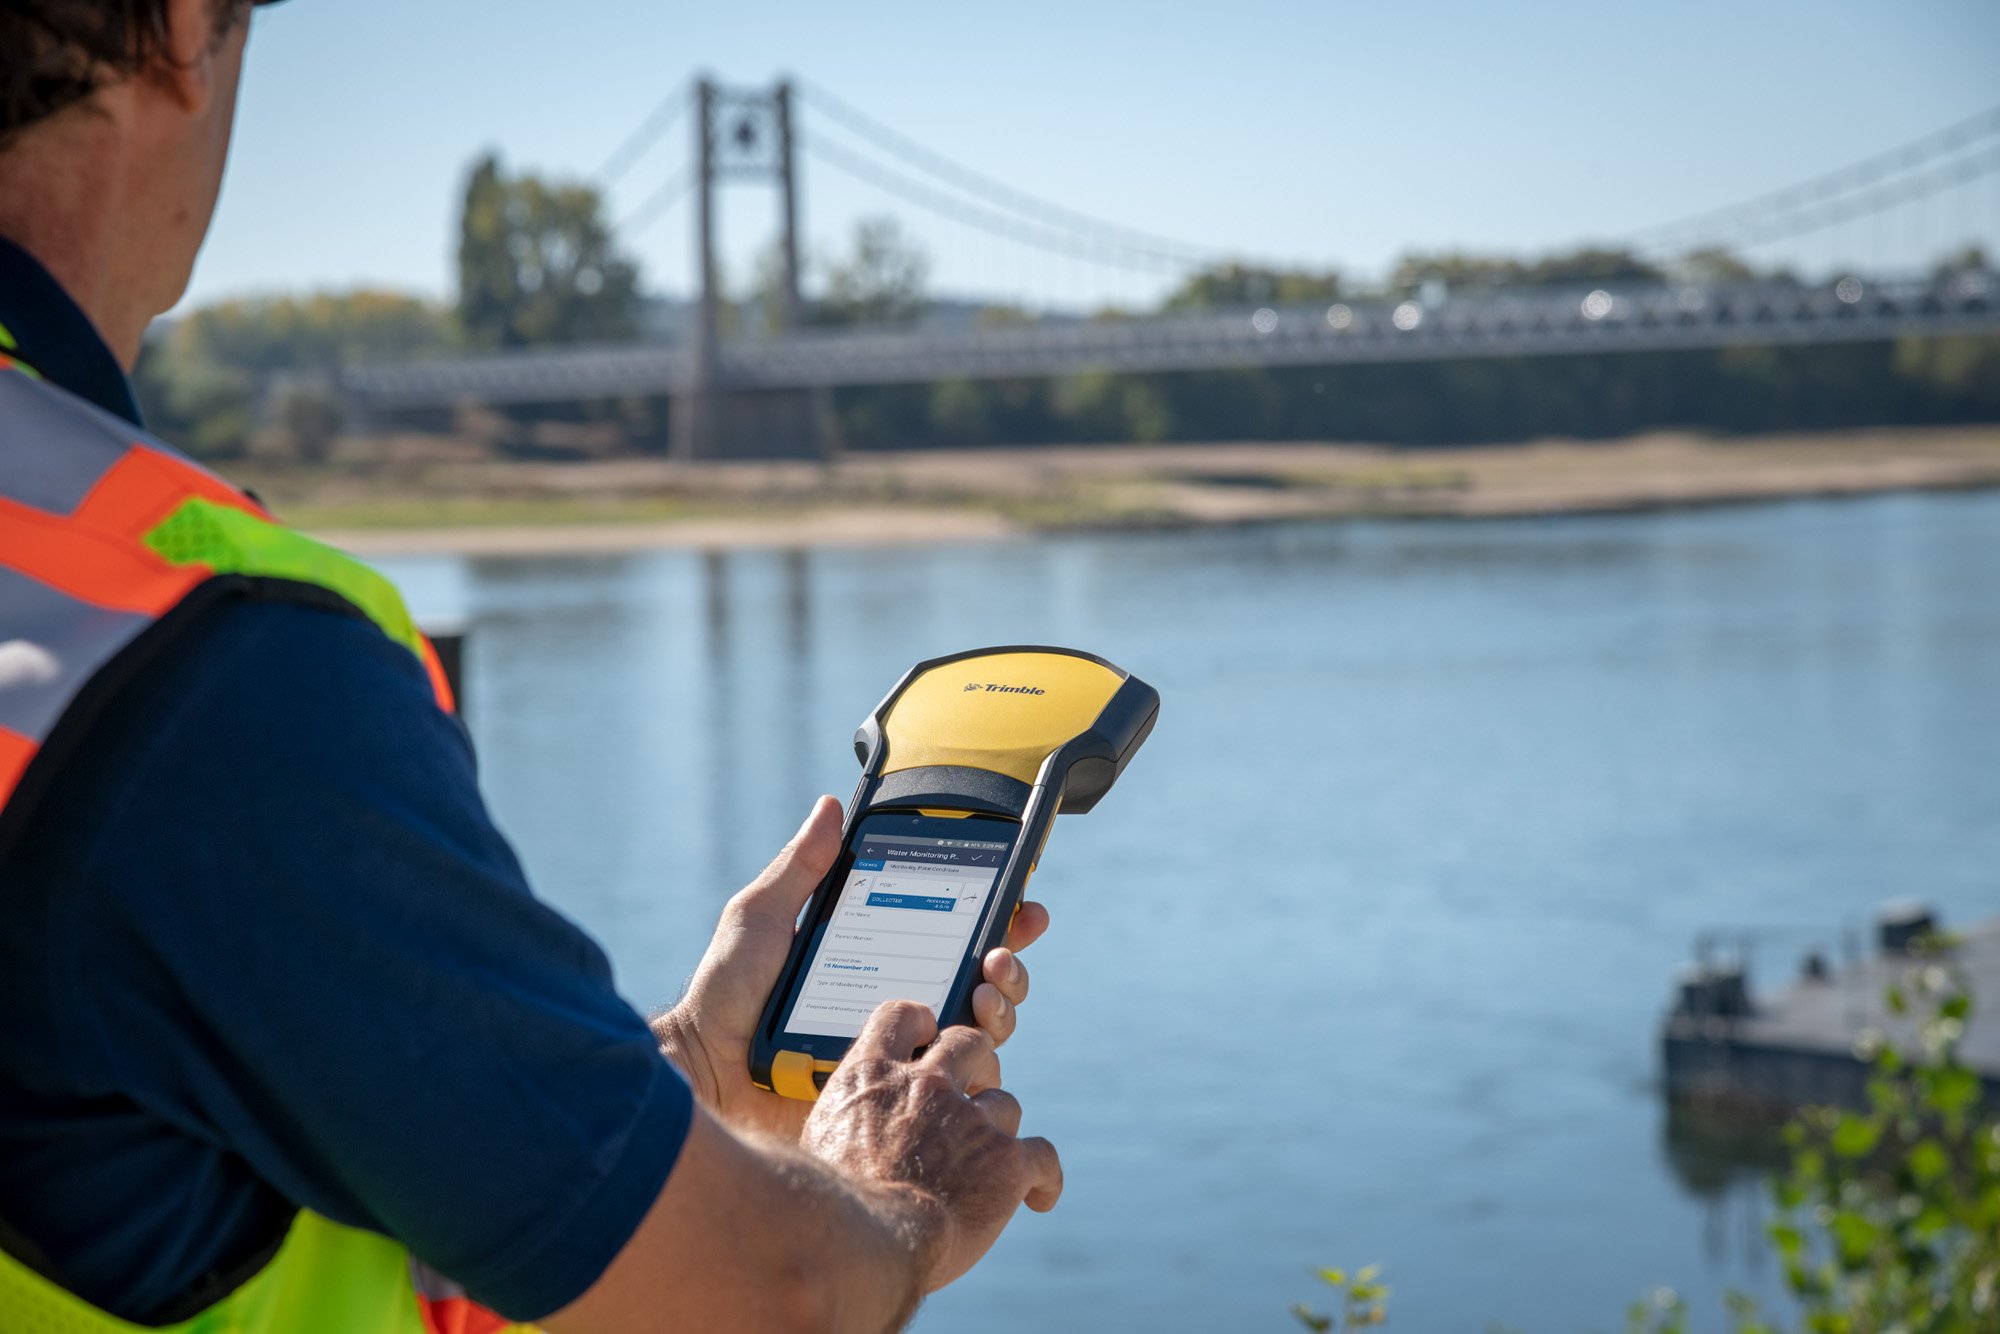 Trimble Geospatial on Twitter: "Ready to test the all-new #Trimble TDC150 next-generation handheld device for GIS data collection in the field? Sign up for a demo here: https://t.co/Q1GZd6Z7l6 https://t.co/oSlmXsI98A" / Twitter